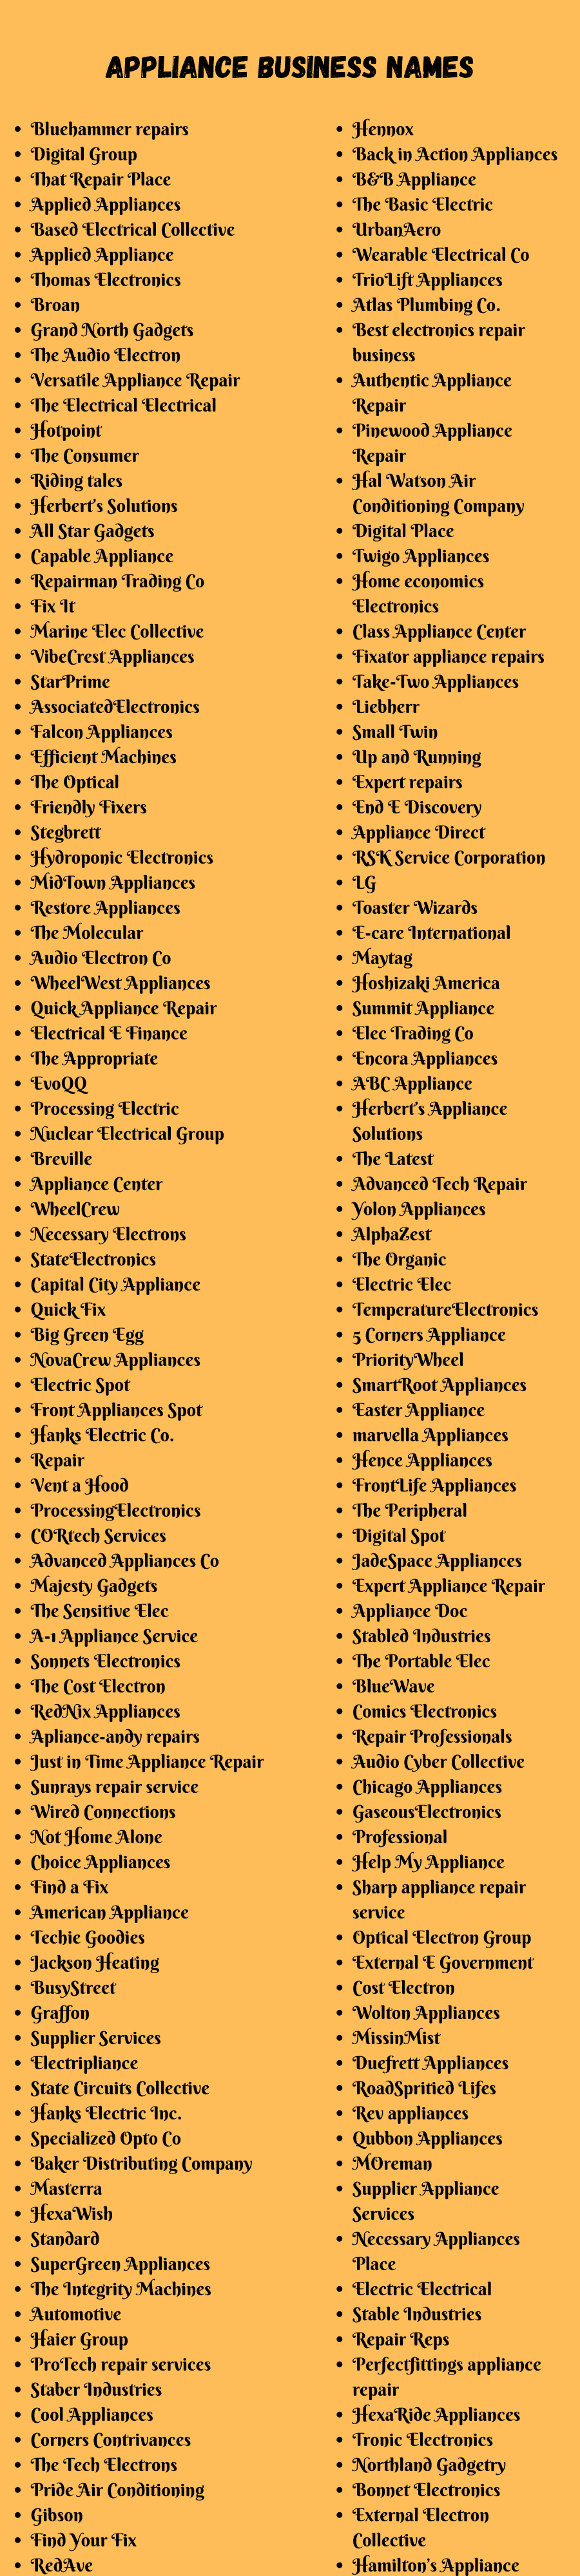 Appliance Business Names 